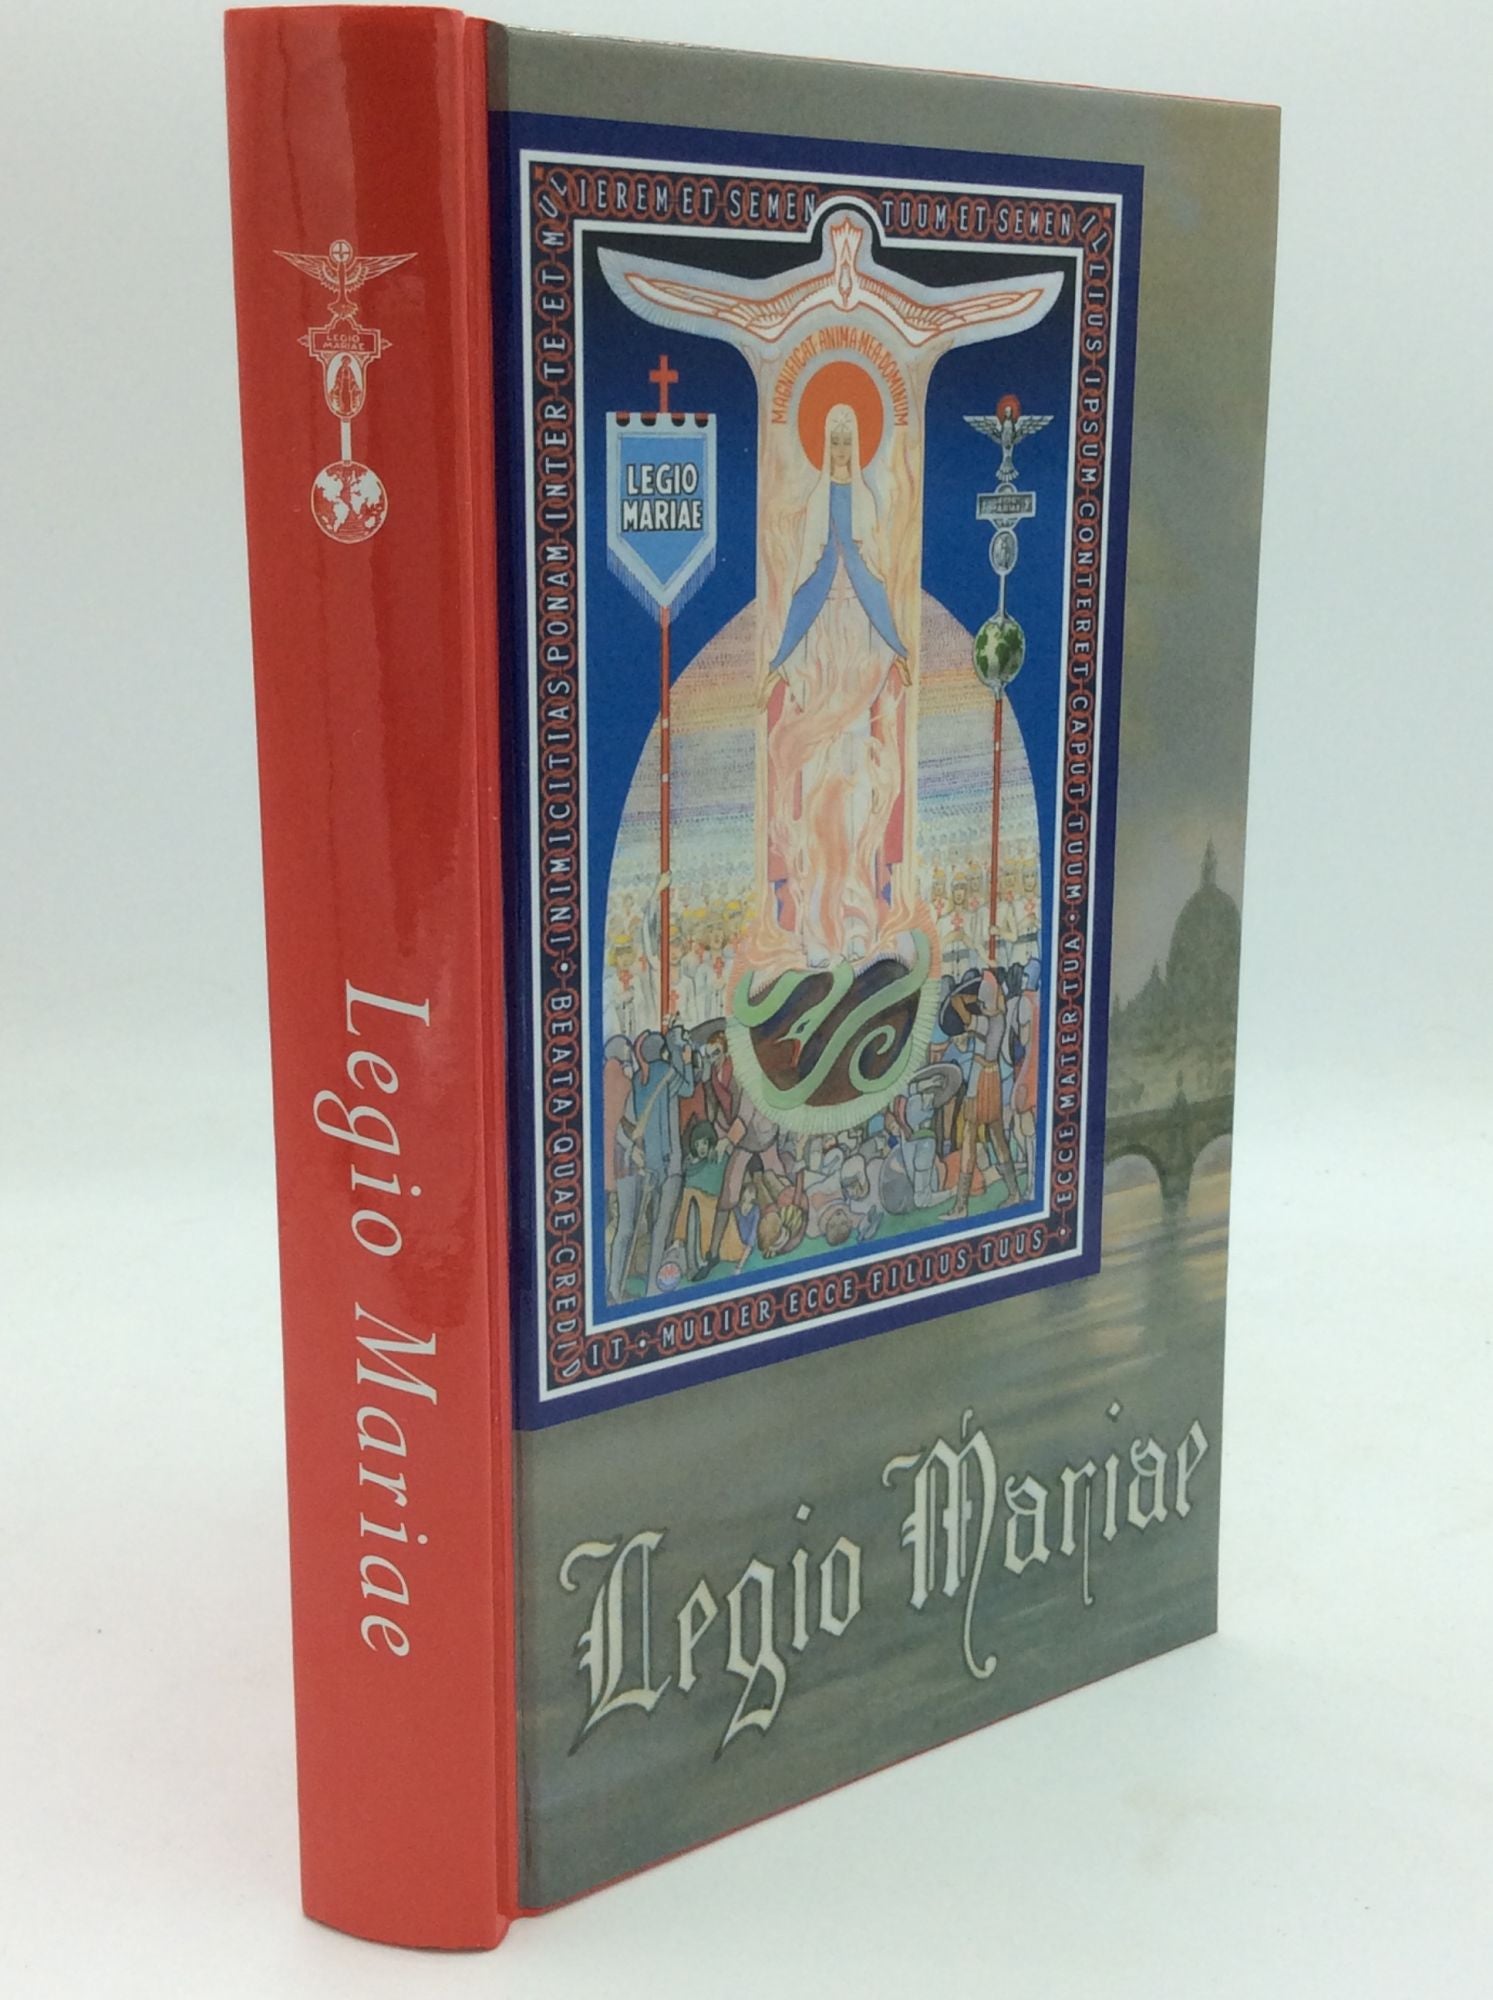  - The Official Handbook of the Legion of Mary